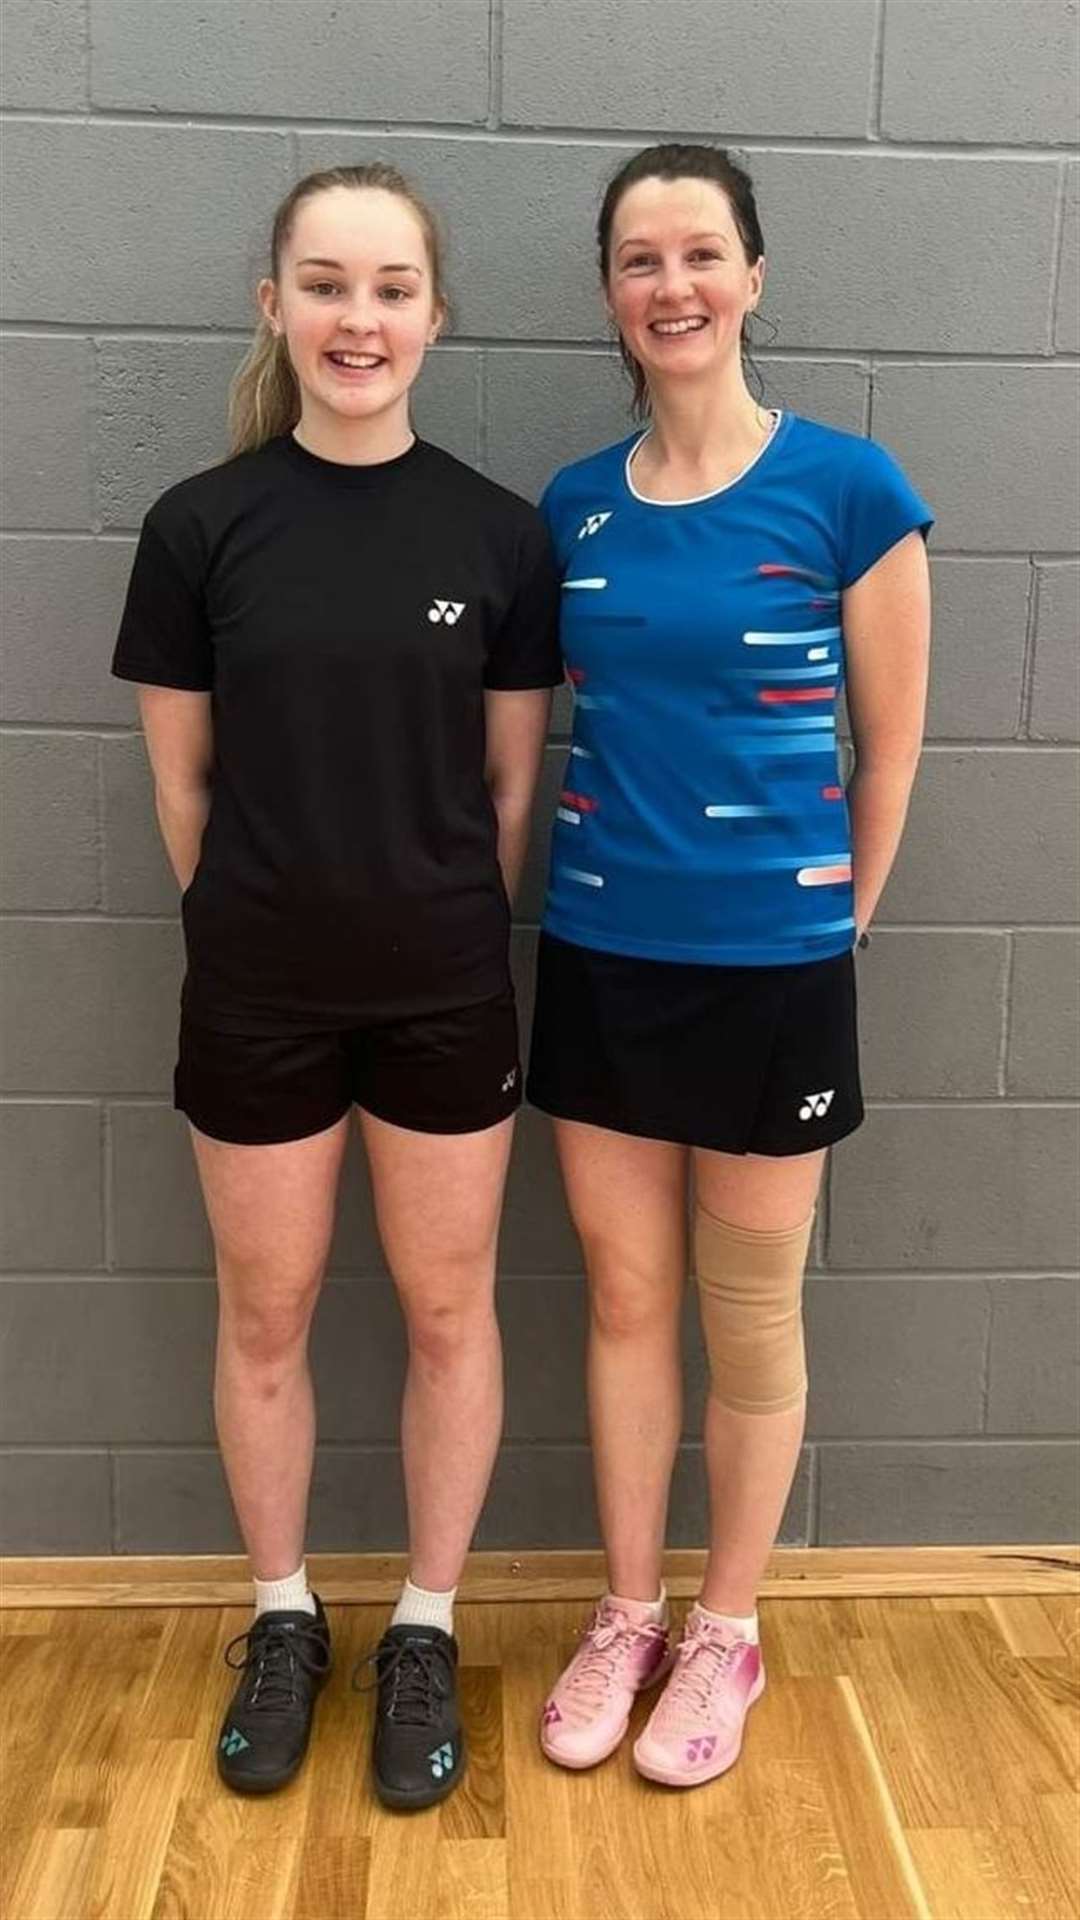 Shannon Leslie and Shona Mackay contested the final of the women’s singles.